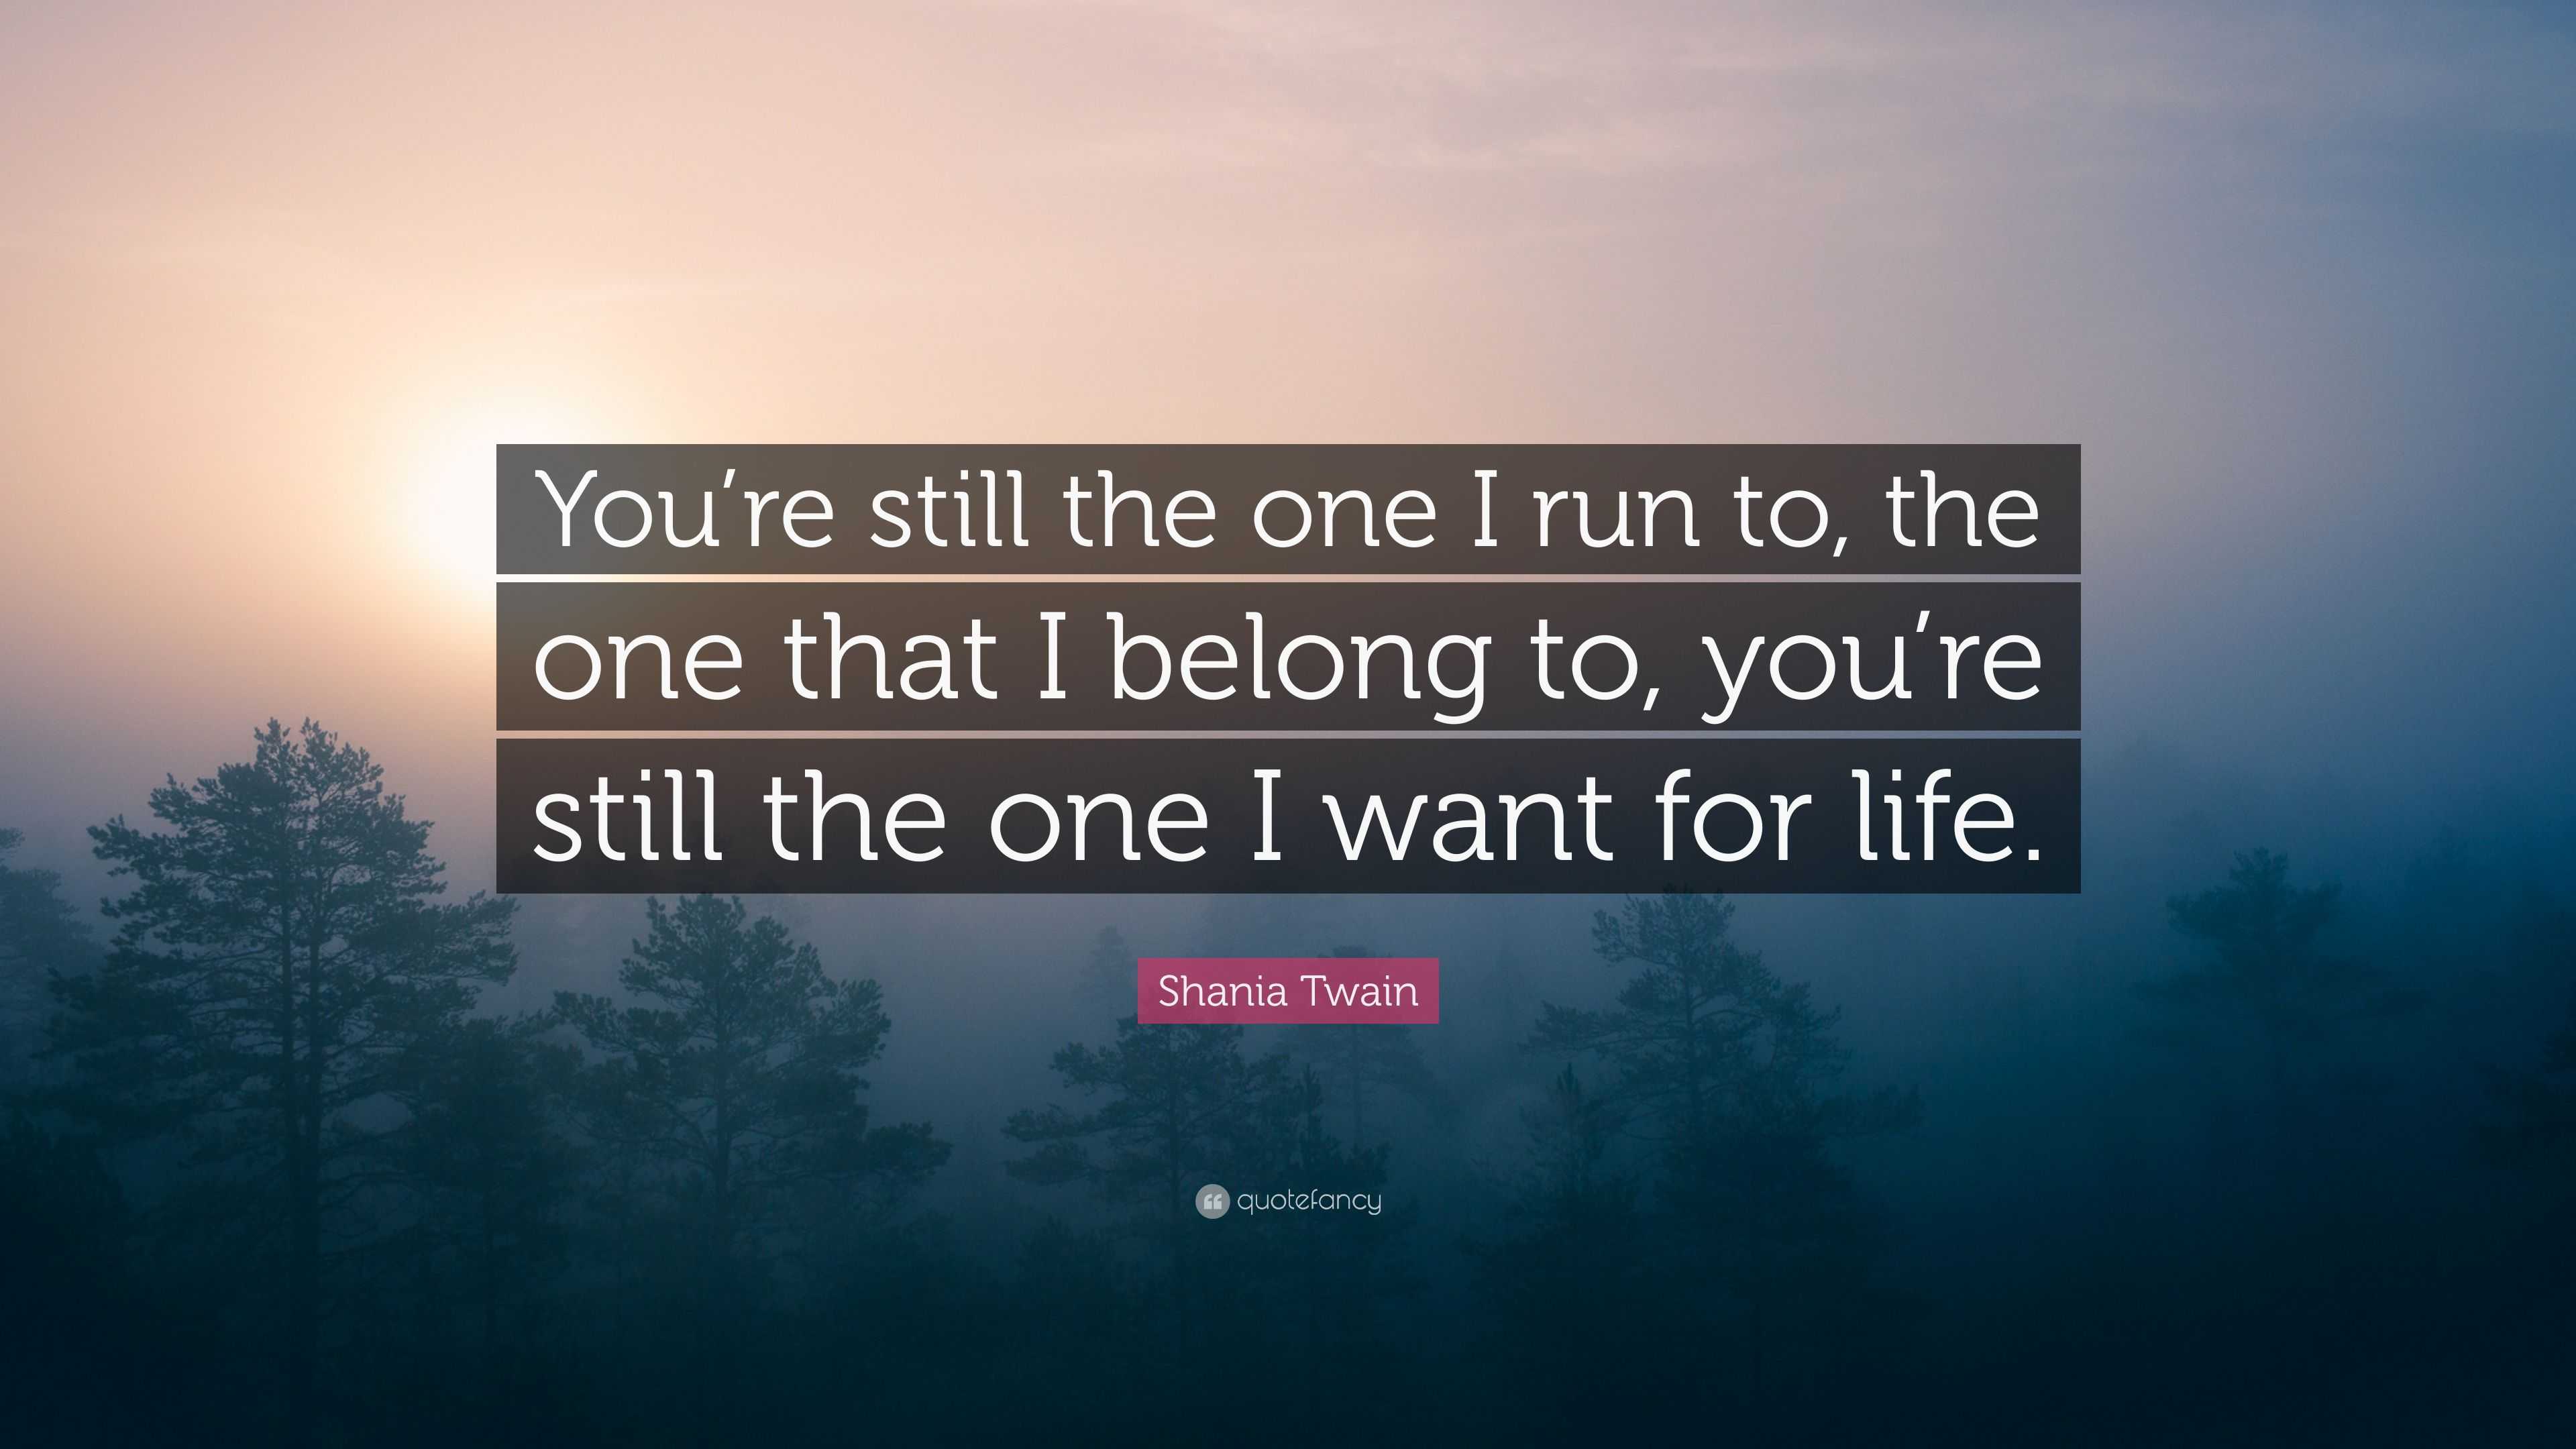 Shania Twain Quote You Re Still The One I Run To The One That I Belong To You Re Still The One I Want For Life 9 Wallpapers Quotefancy